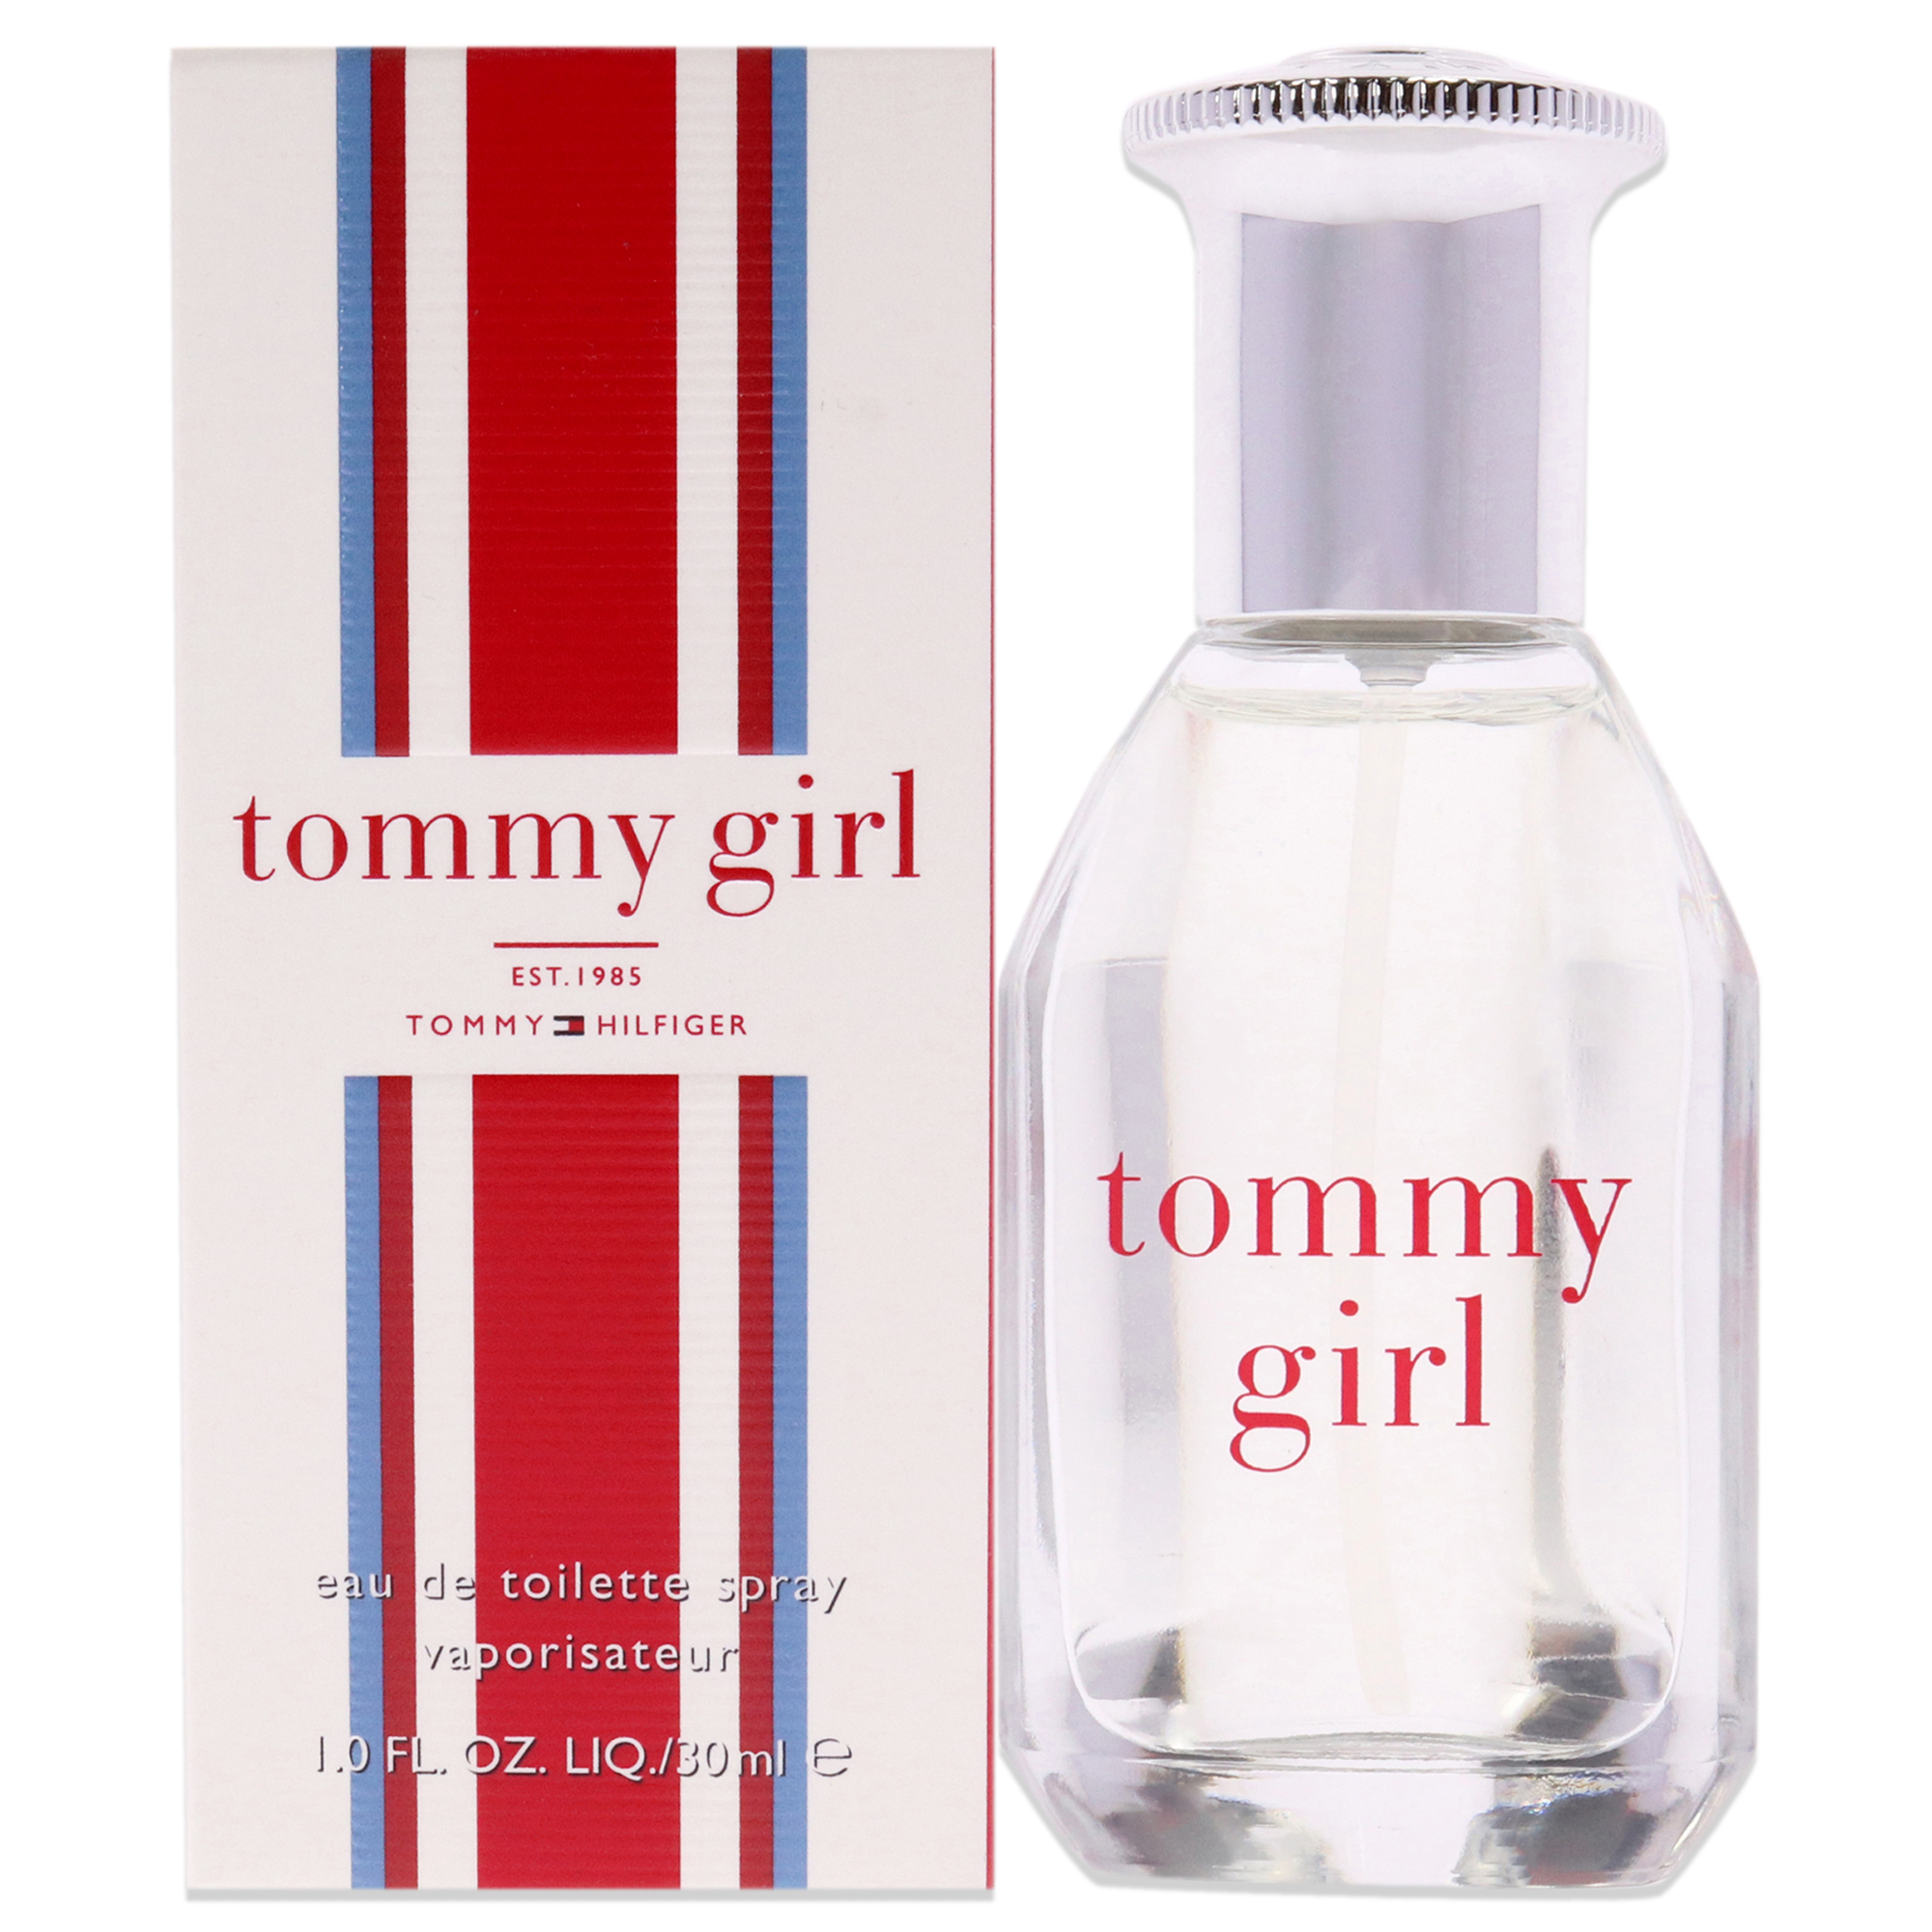 Tommy Girl by Tommy Hilfiger for Women - 1 oz EDT Spray